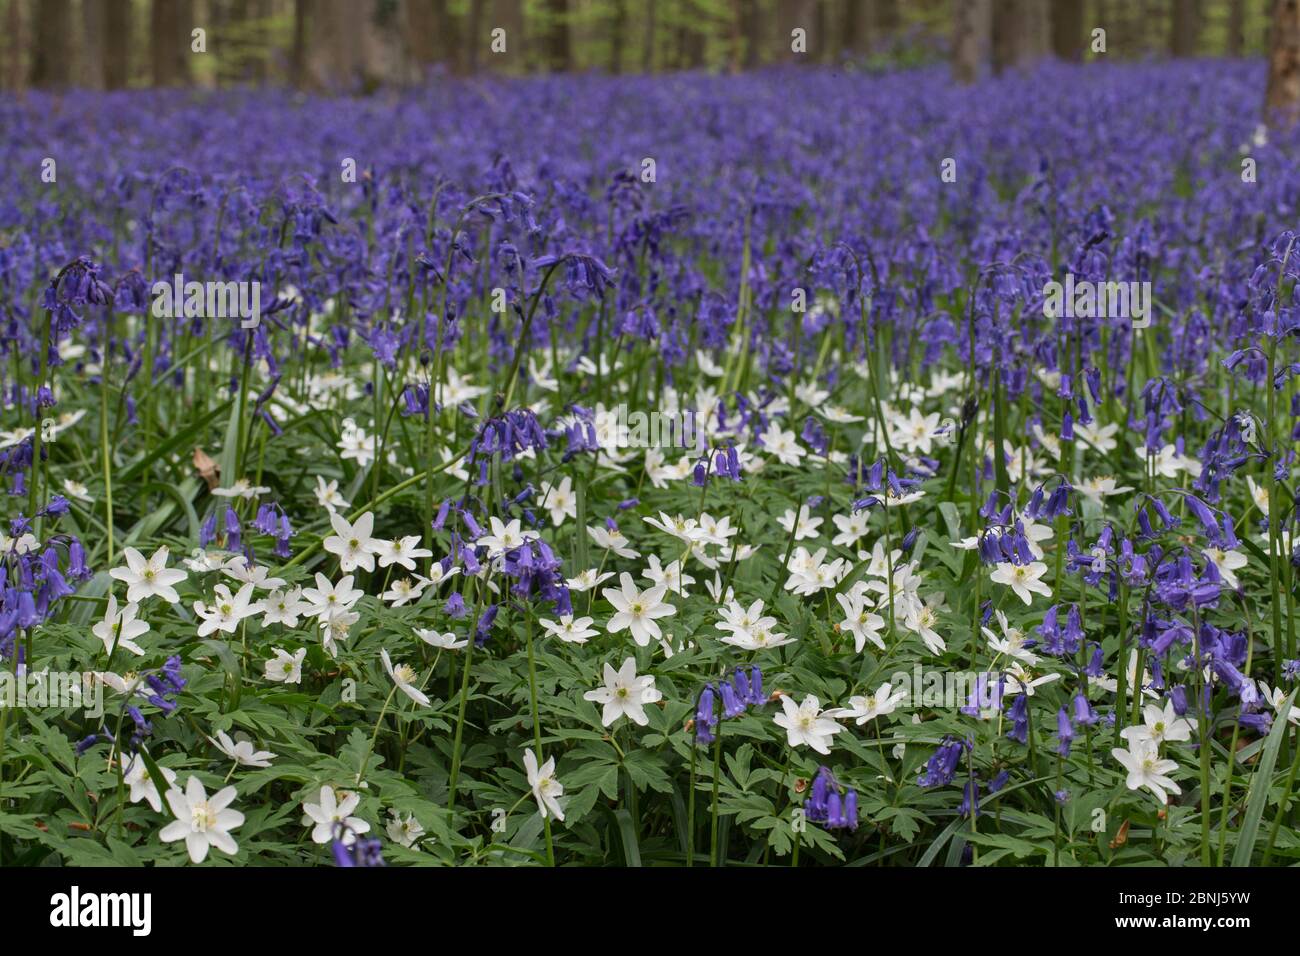 Bluebells (Hyacinthoides non-sripta) with Wood anemone (Anemone nemorosa) flowering in beech forest, Hallerbos,  Vlaams-Brabant, Belgium, April. Stock Photo